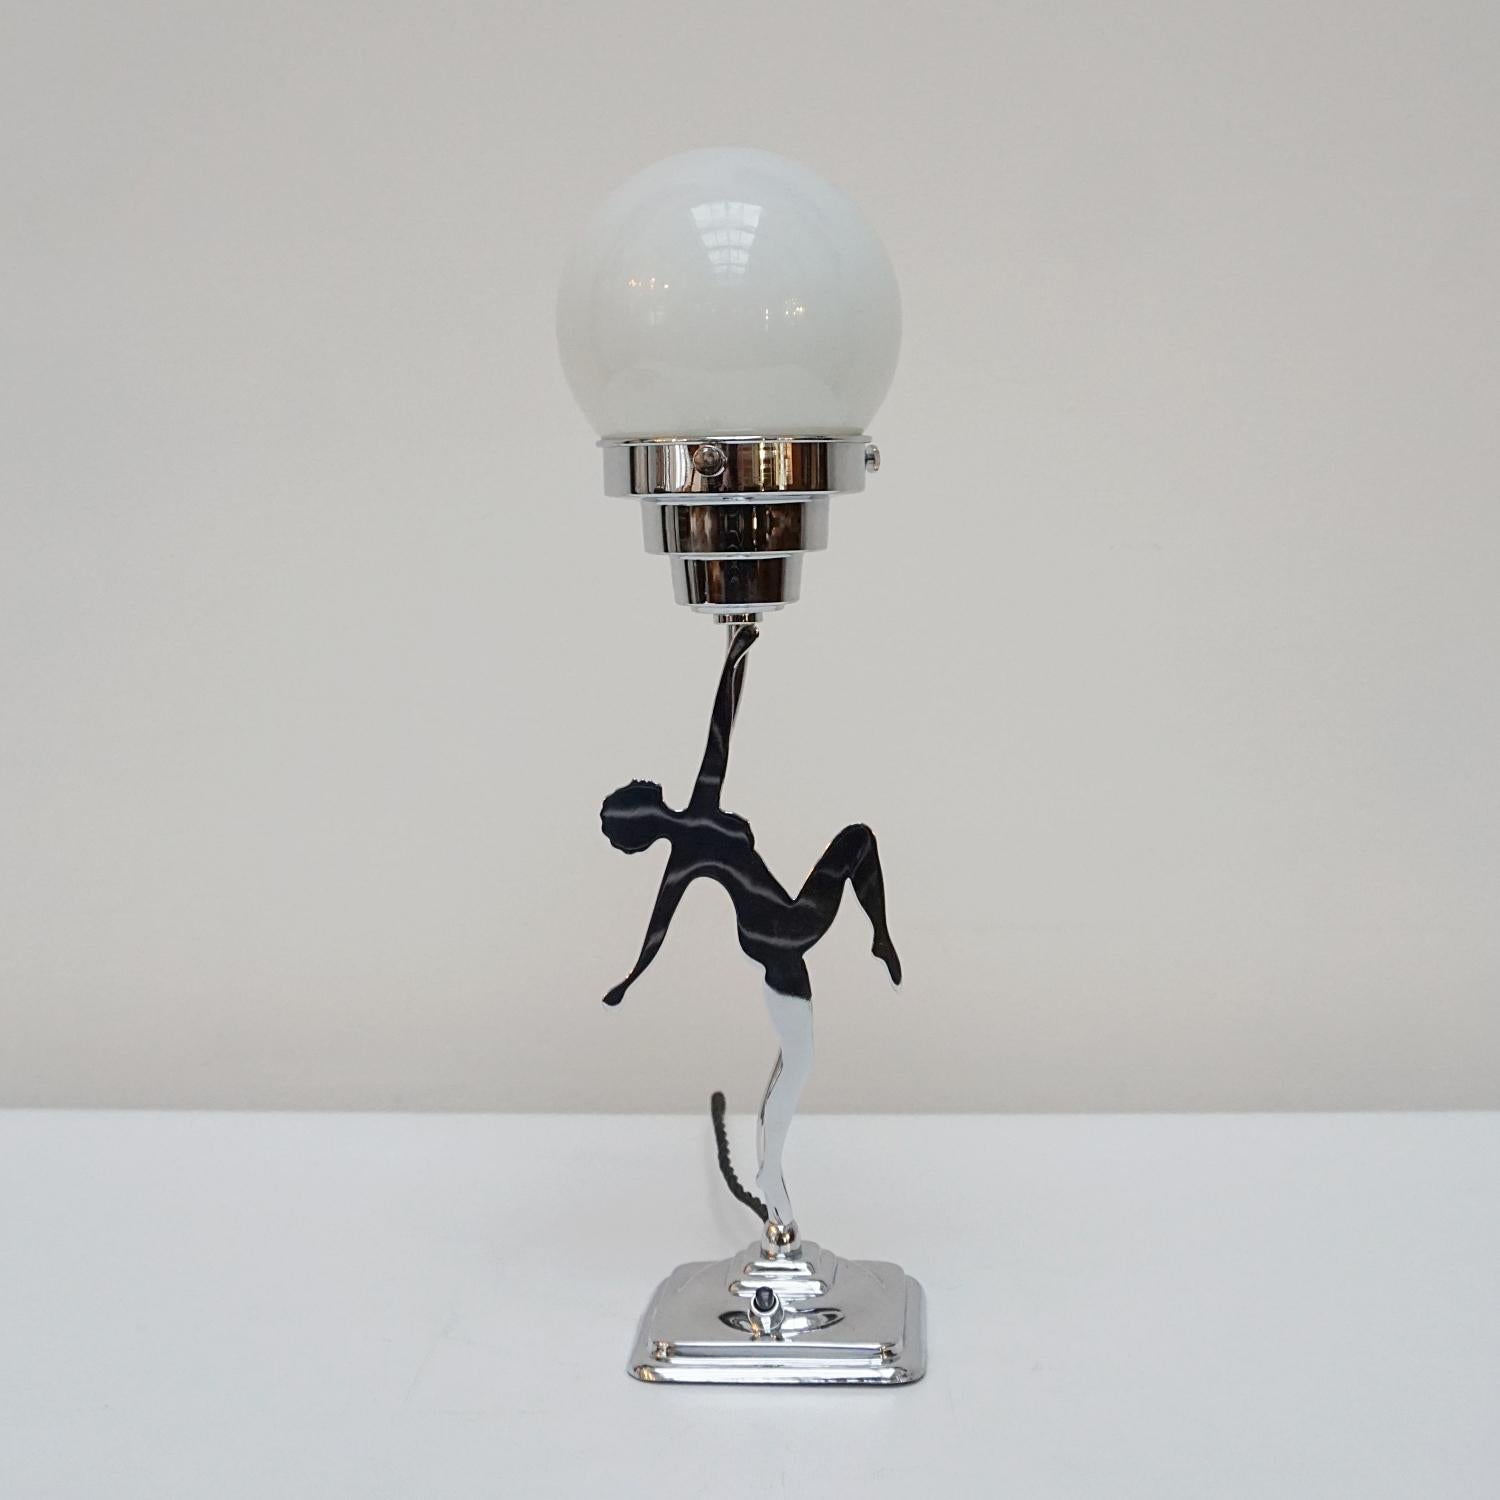 An original Art Deco table lamp. White glass globe shade with a chromed stylised dancer stem. 

Dimensions: H 40cm W 10cm

Origin: English 

Item Number: J314

All of our lighting is fully refurbished, re-wired, and re-chromed with some replacement